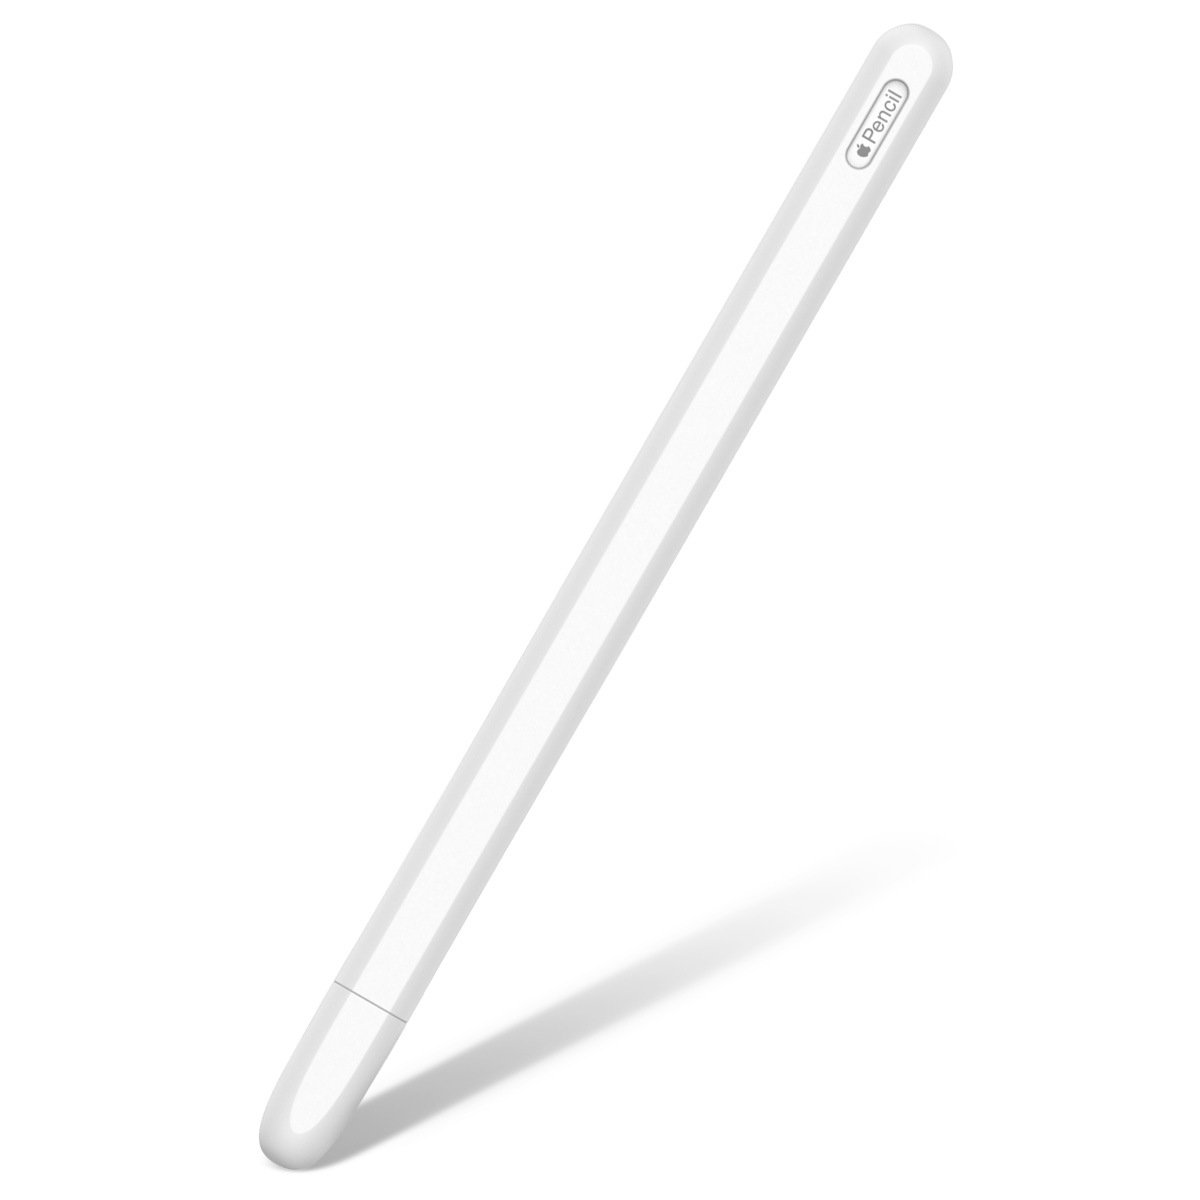 Bakeey-Anti-slip-Anti-fall-Silicone-Touch-Screen-Stylus-Pen-Protective-Case-for-Apple-Pencil-2nd-Gen-1593573-8